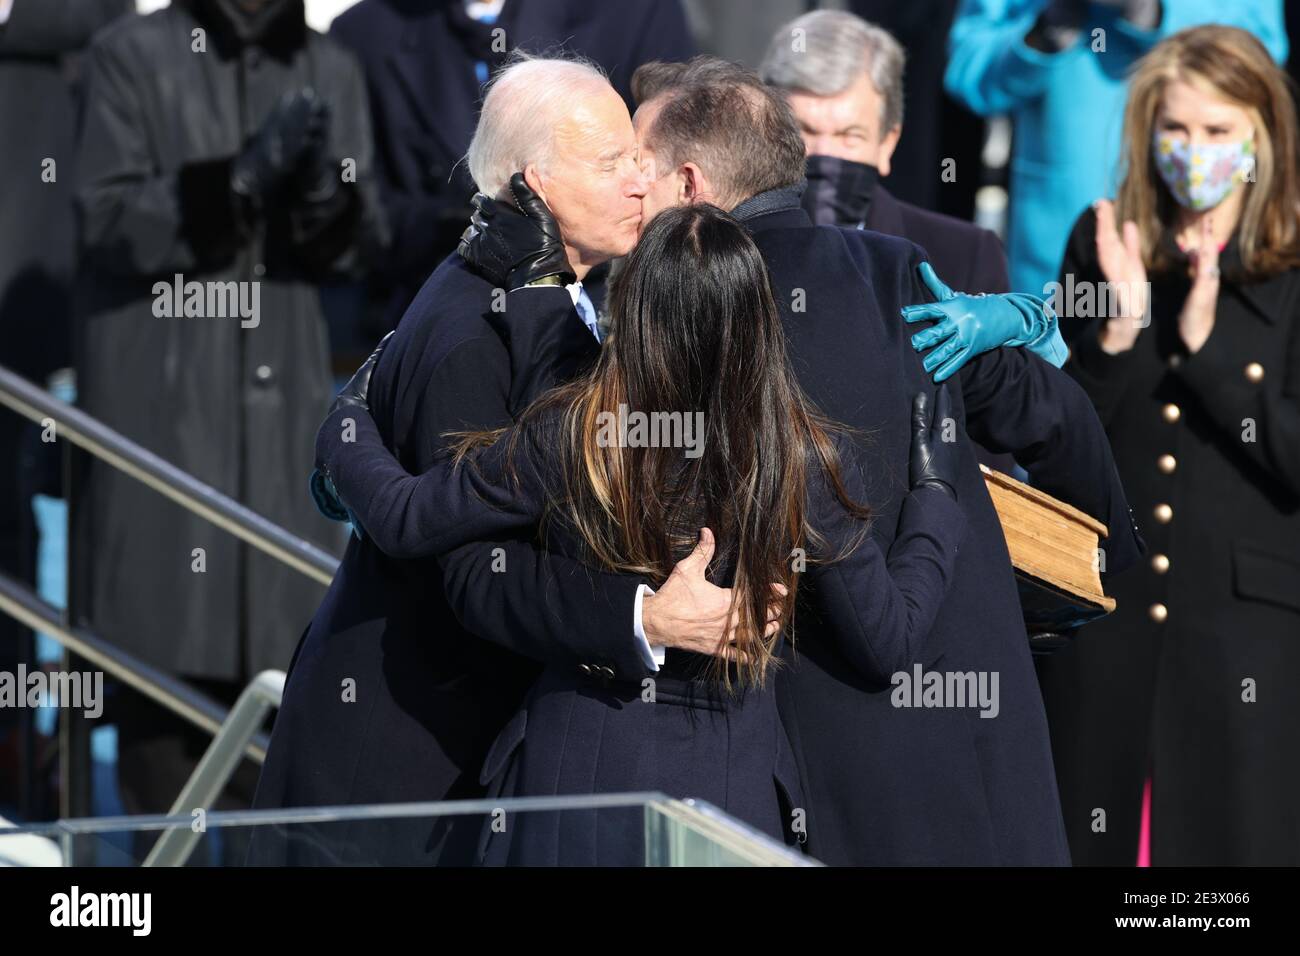 Washington, USA. 20th Jan, 2021.President Joe Biden, First Lady Jill Biden, Hunter Biden and Ashley Biden embrace during the Inauguration Day ceremony of President-Elect Joe Biden and Vice President-Elect Kamala Harris held at the U.S. Capitol Building in Washington, D.C. on Jan. 20, 2021. President-elect Joe Biden becomes the 46th President of the United States at noon on Inauguration Day. (Photo by Oliver Contreras/Sipa USA) Stock Photo